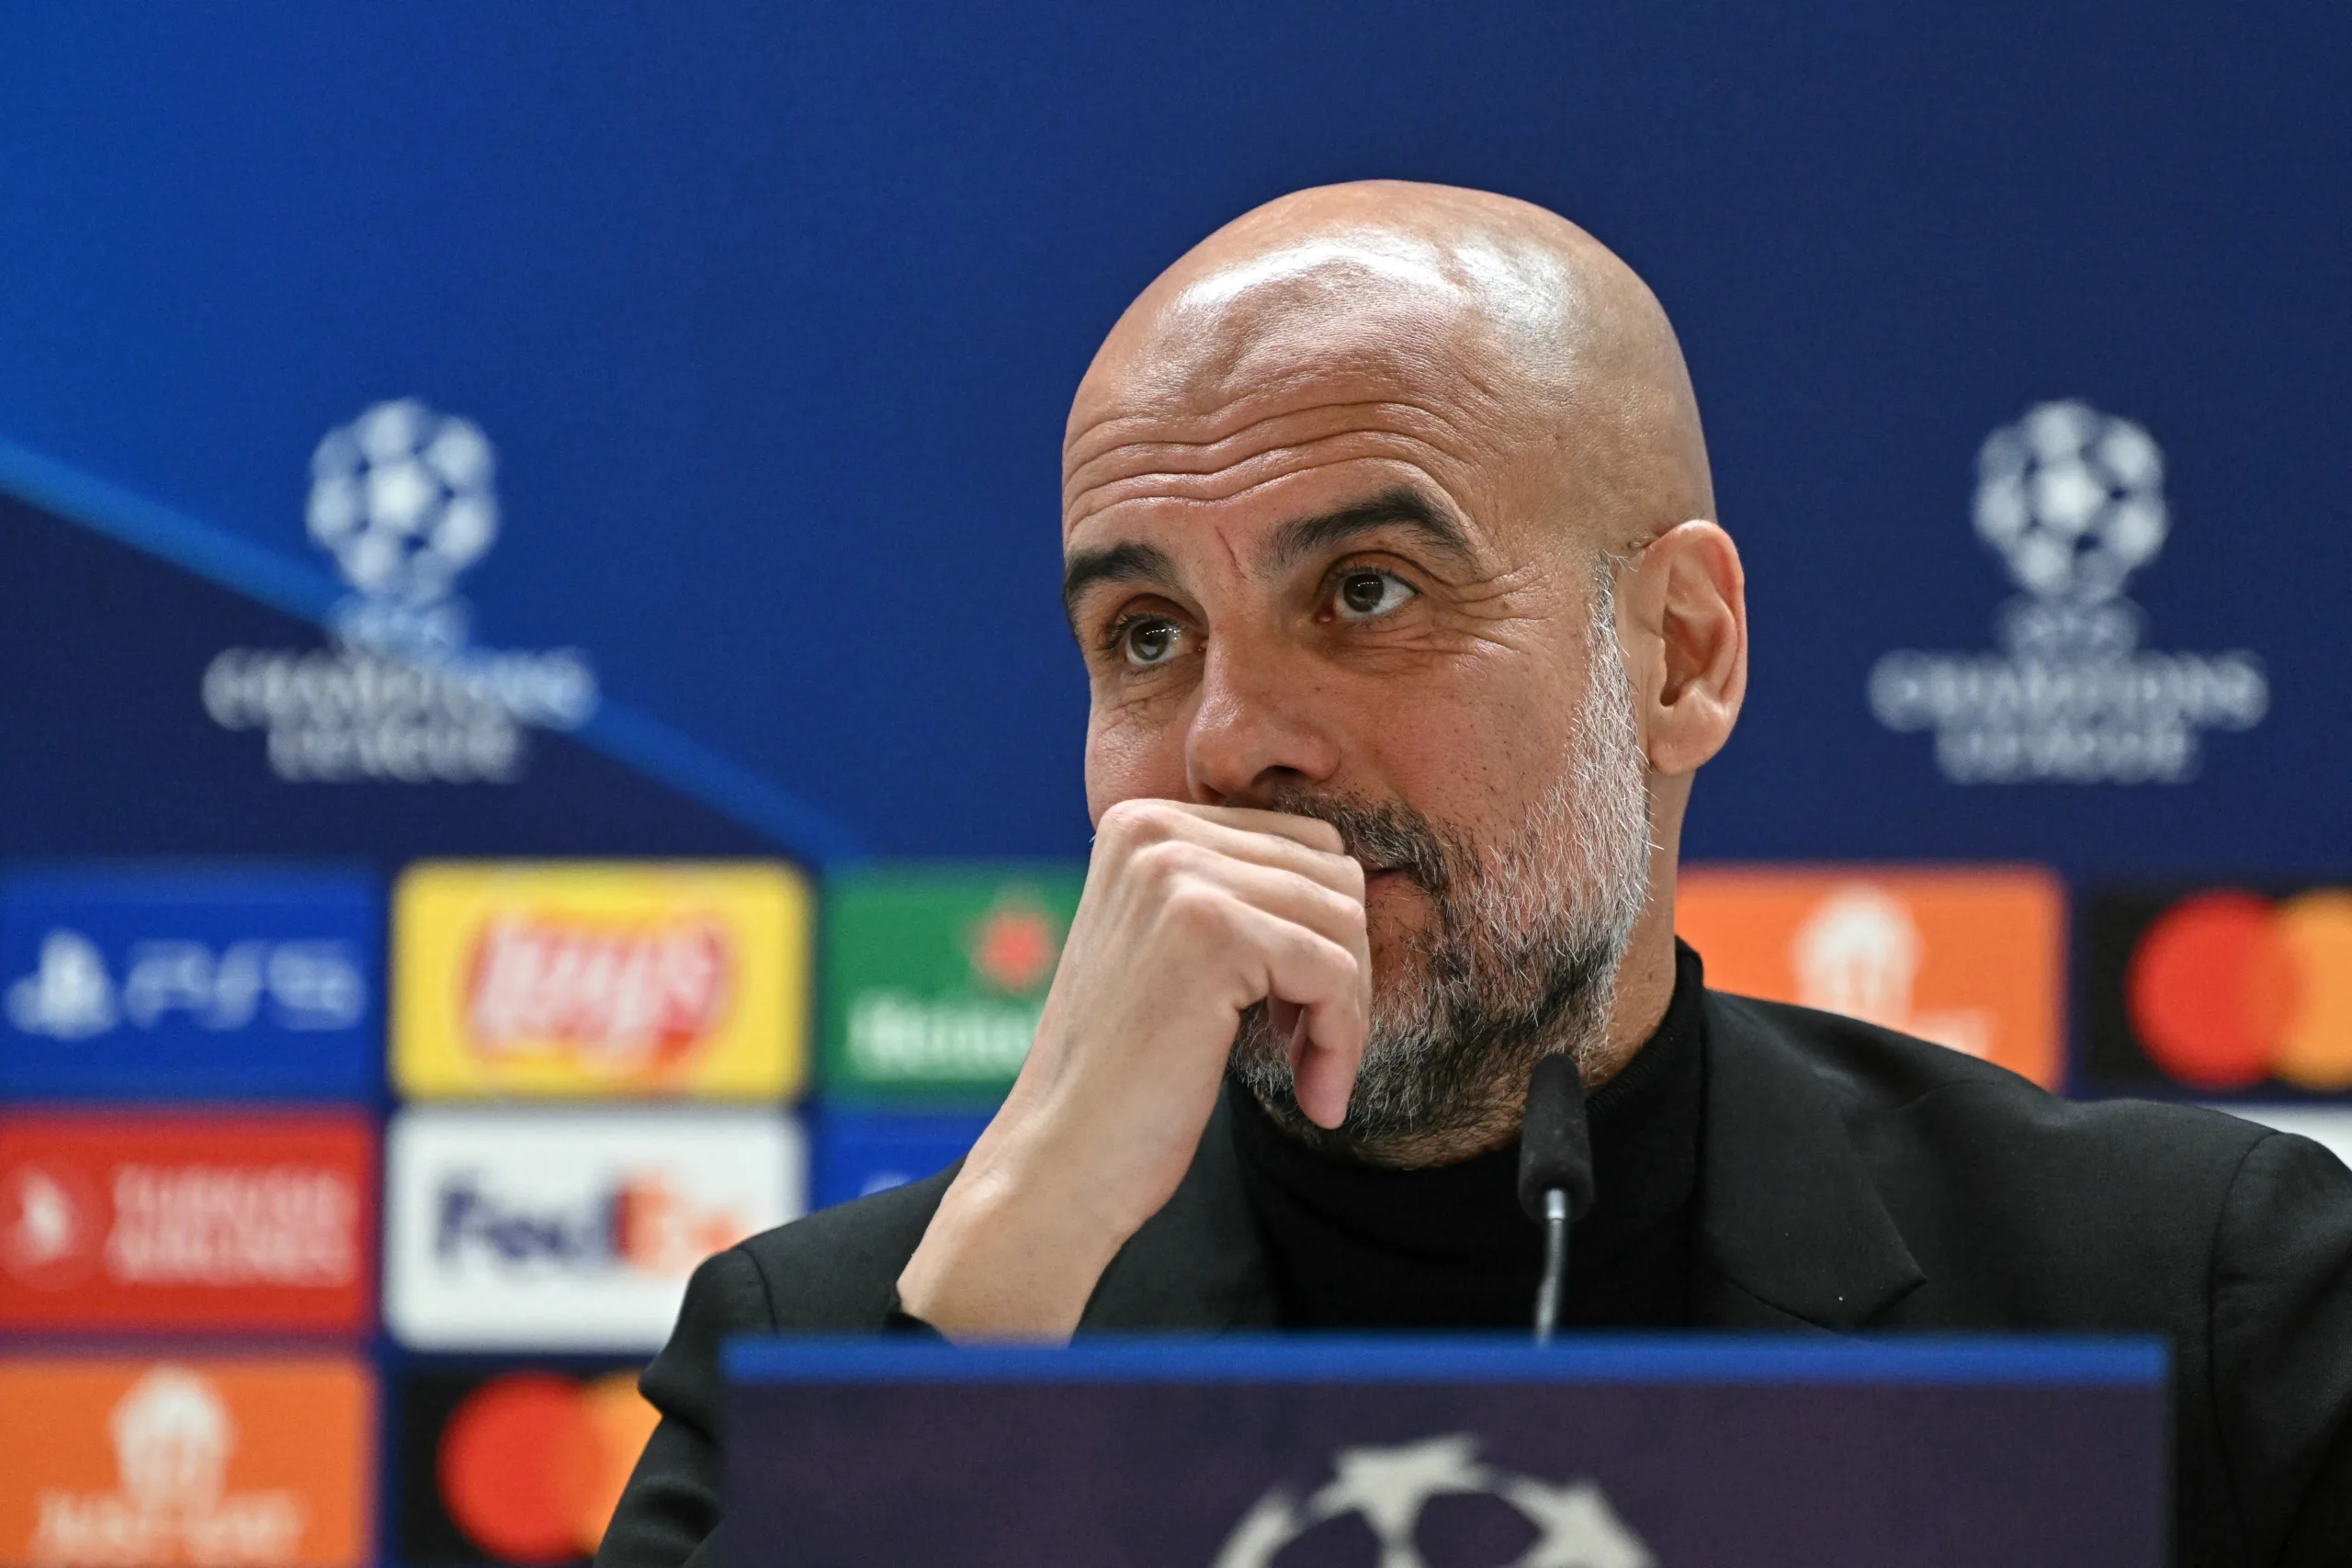 Guardiola, manager of Champions League quarterfinal team Manchester City